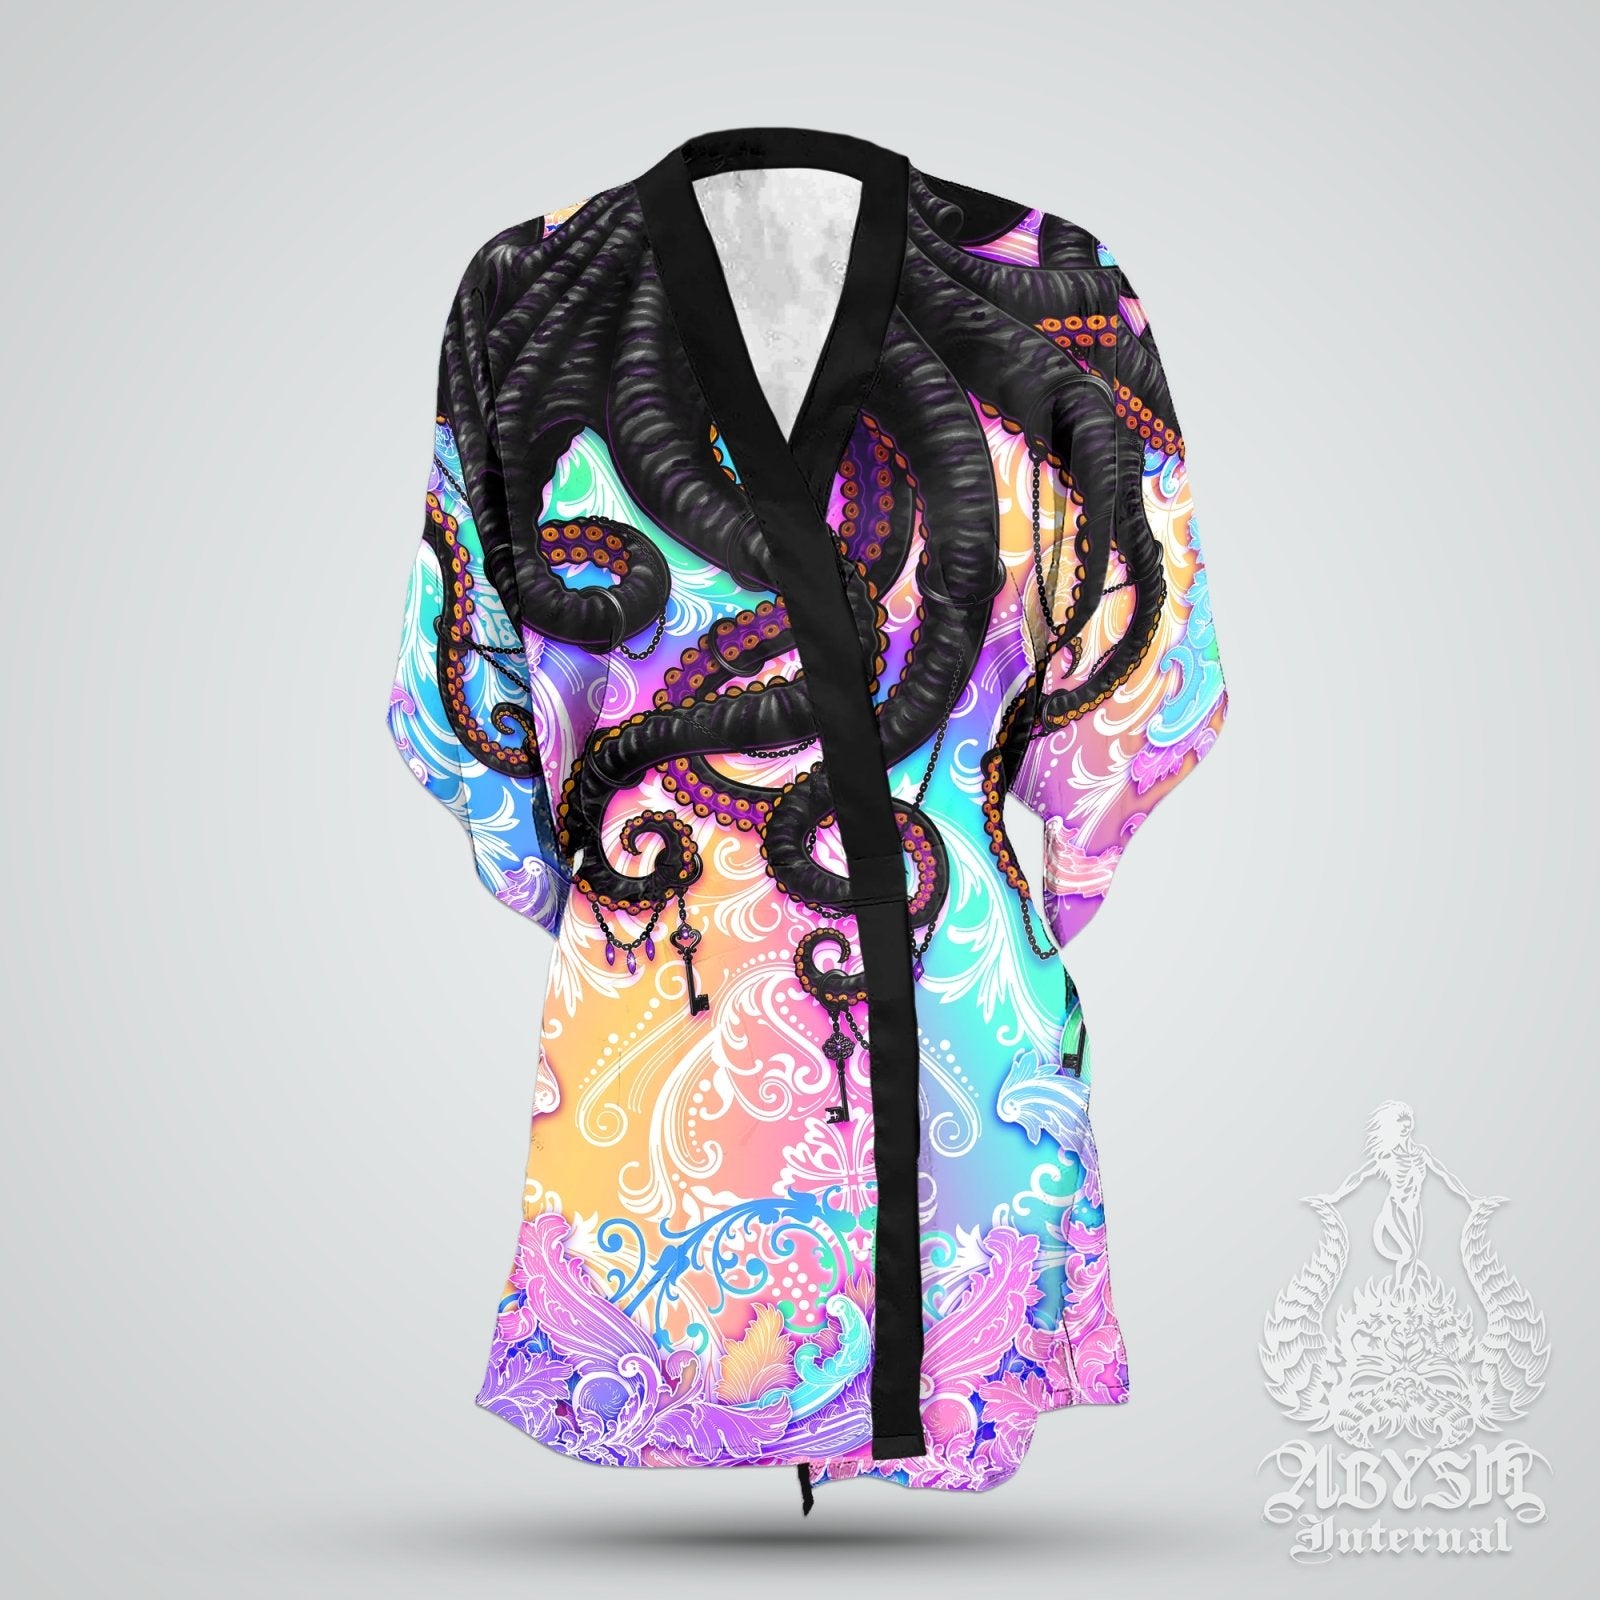 Beach Cover Up, Beach Rave Outfit, Octopus Party Kimono, Summer Festival Robe, Aesthetic Indie and Alternative Clothing, Unisex - Pastel Punk Black - Abysm Internal